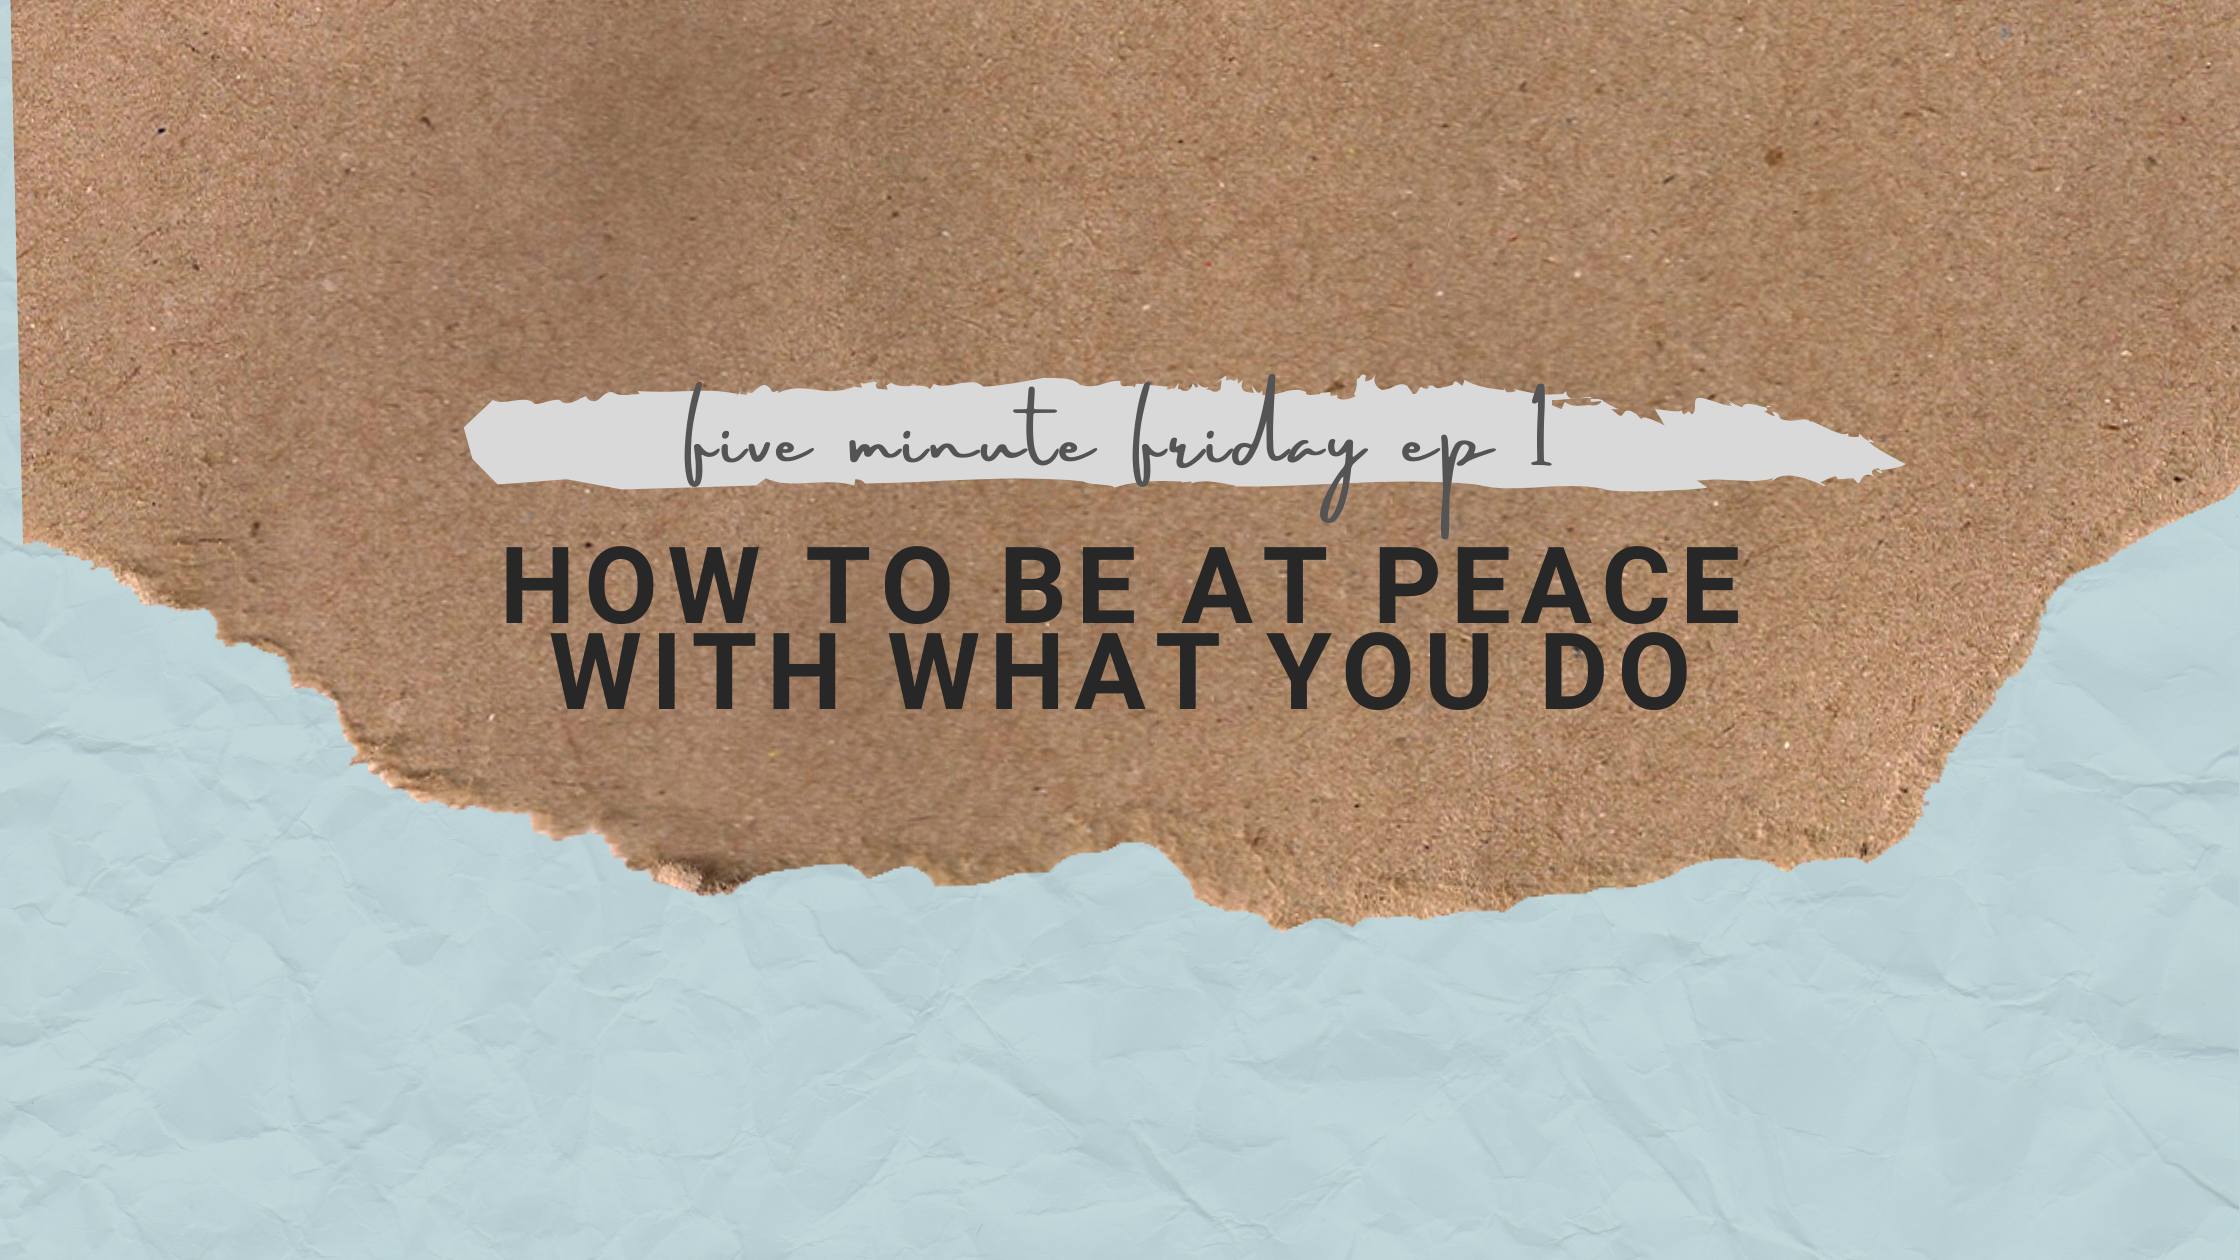 You are currently viewing How to be at peace with what you do – Five Minute Friday Ep 1